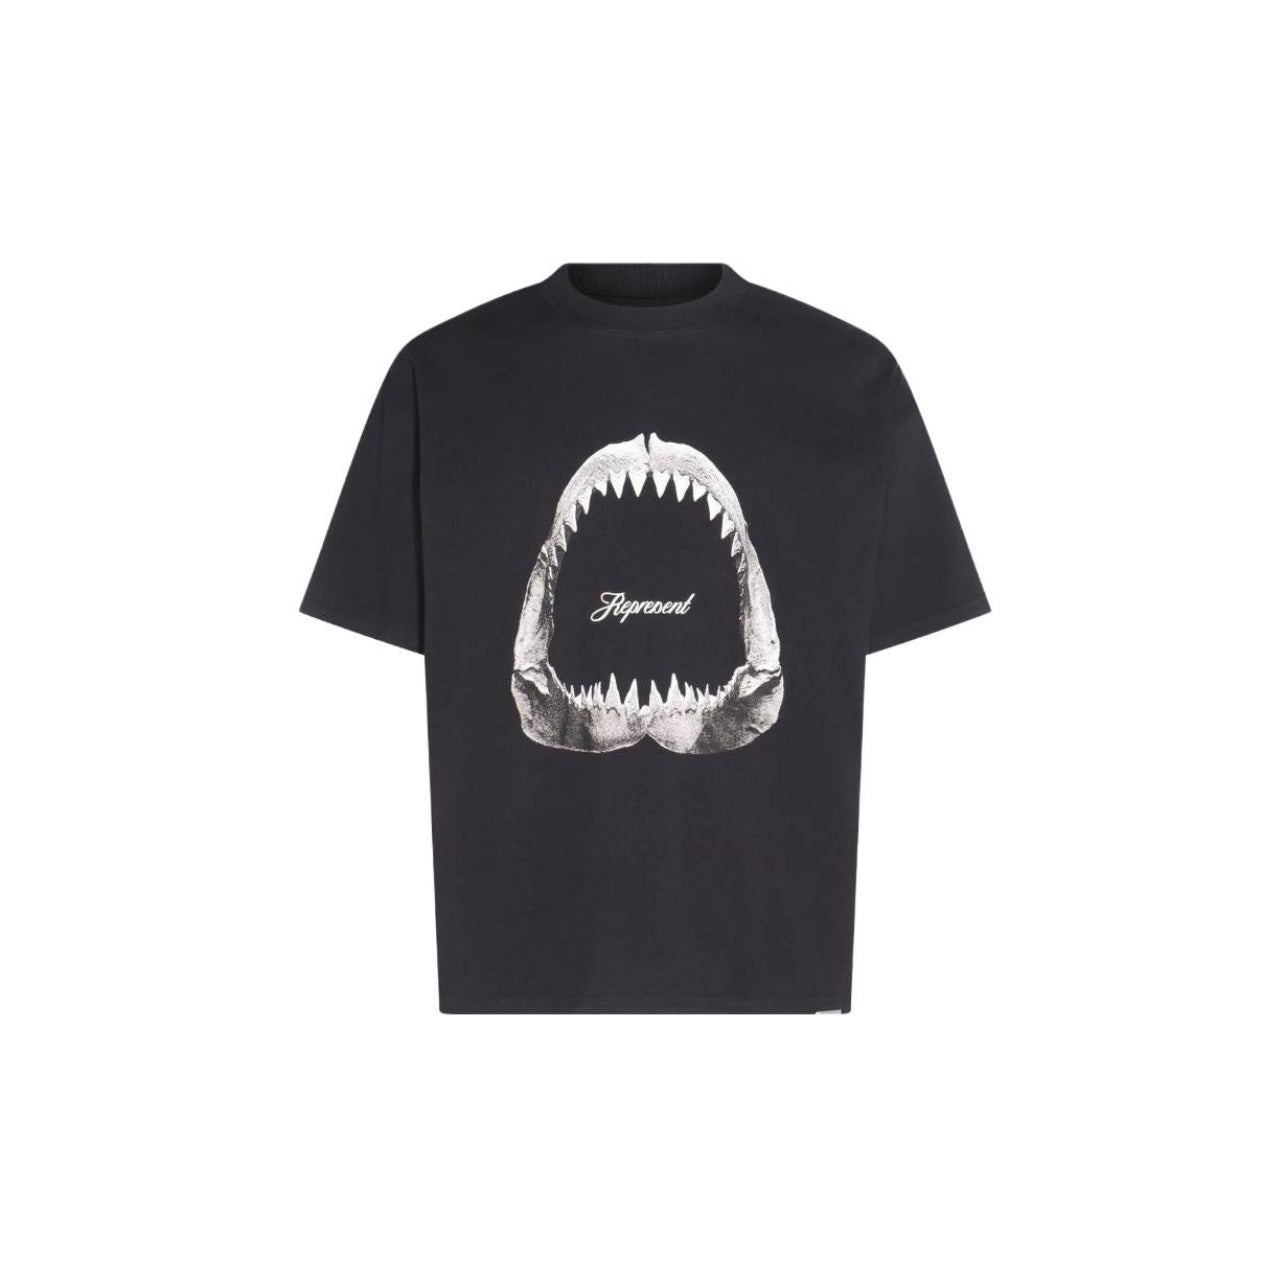 Represent Graphic Print Collection Oversized Tee